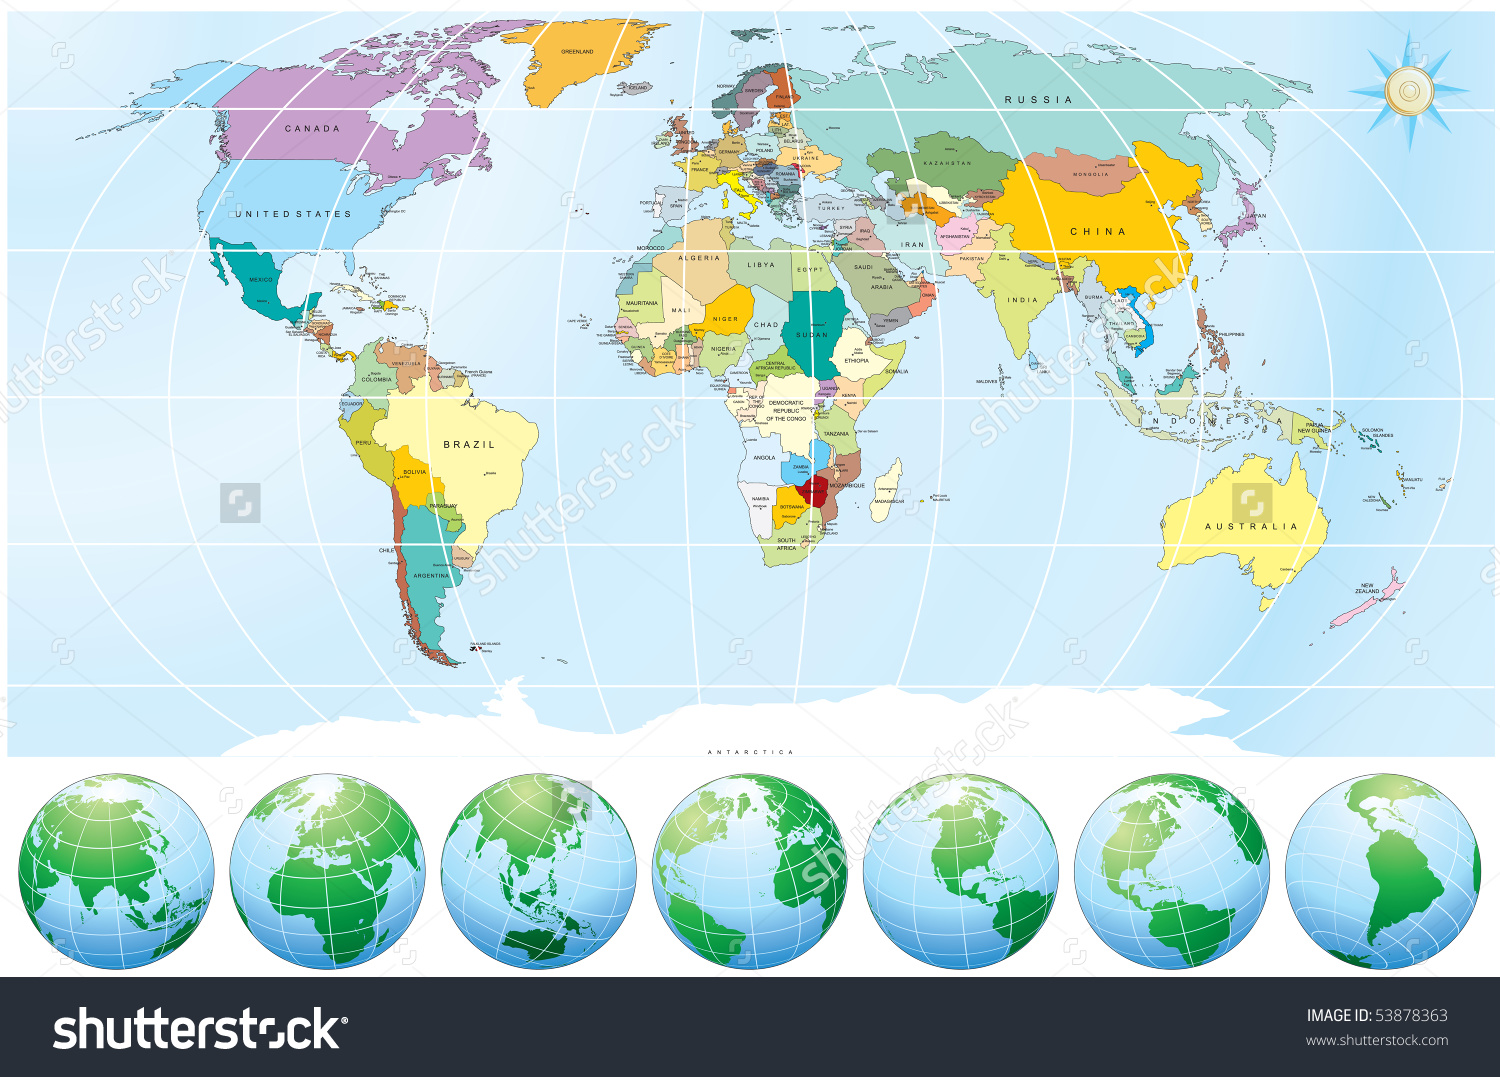 Editable World Map with Countries